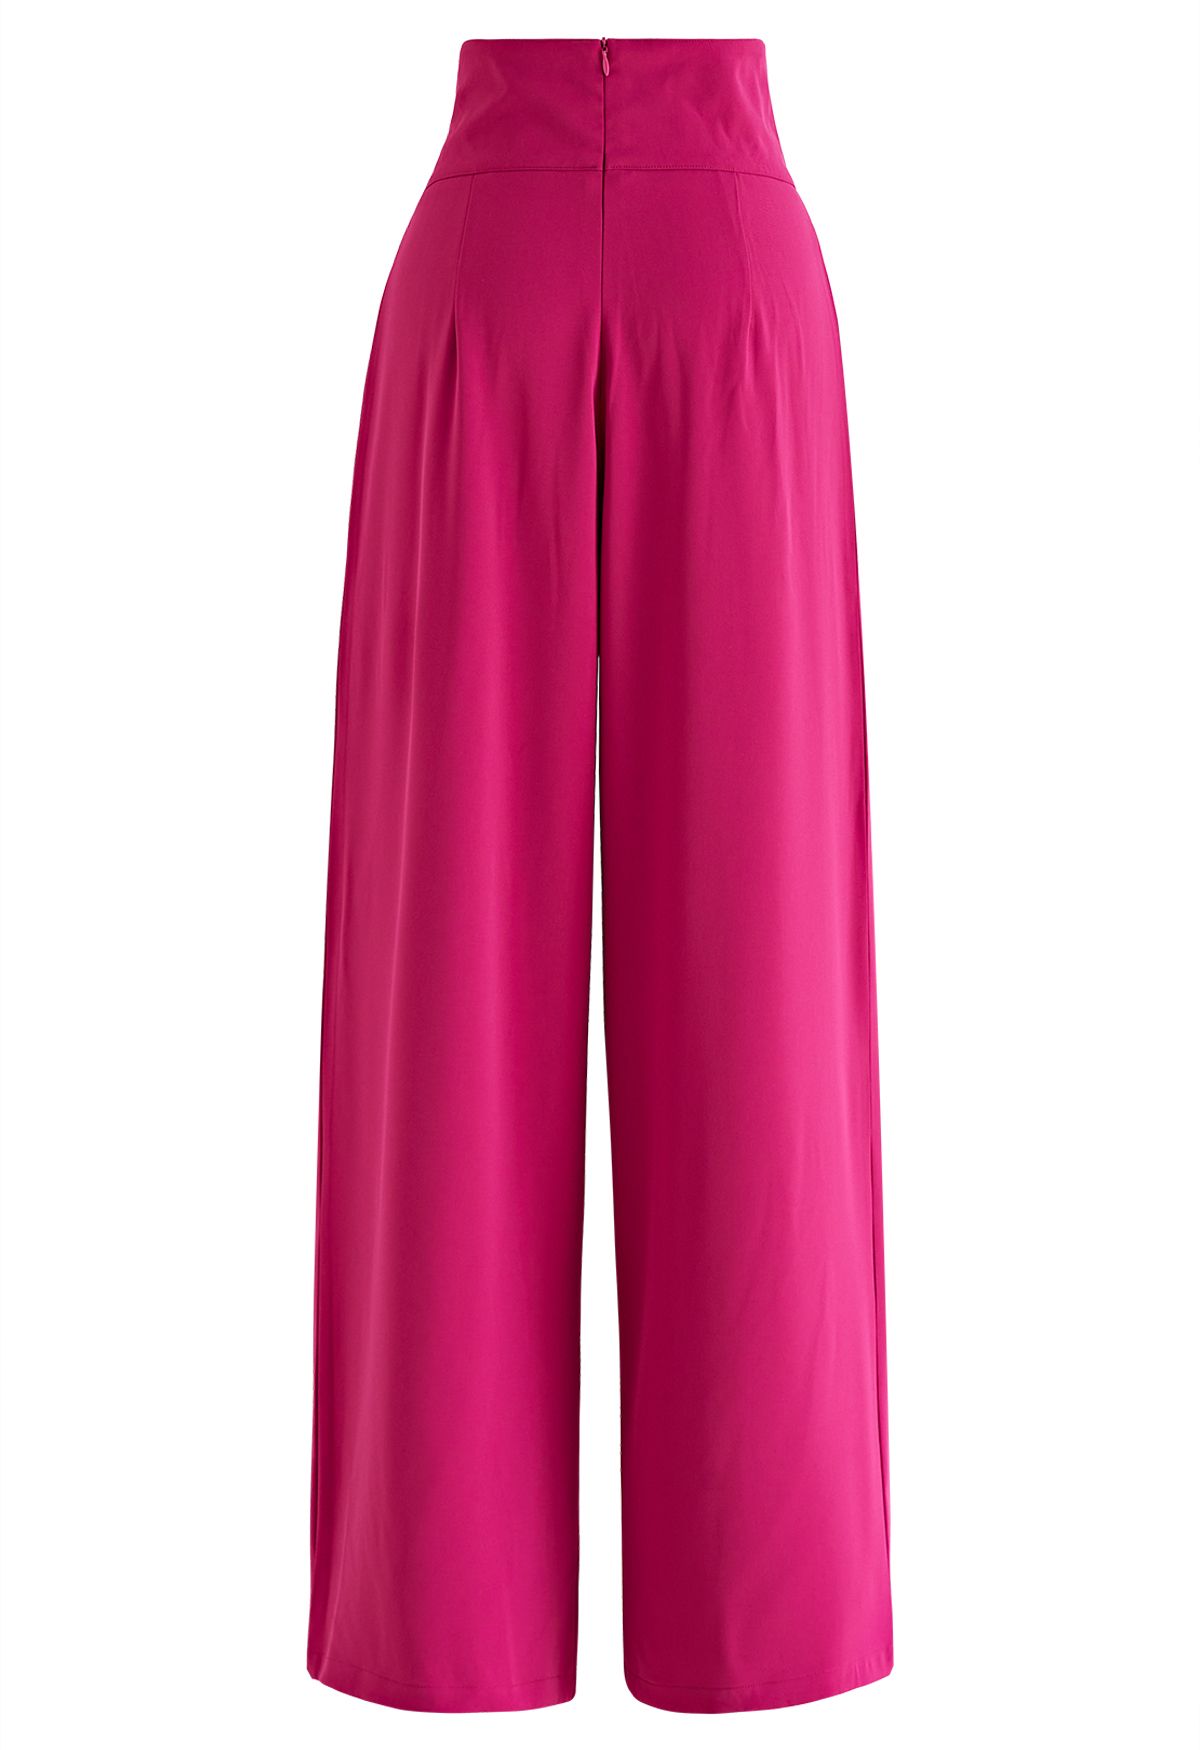 Bowknot High Waist Wide-Leg Pants in Magenta - Retro, Indie and Unique  Fashion